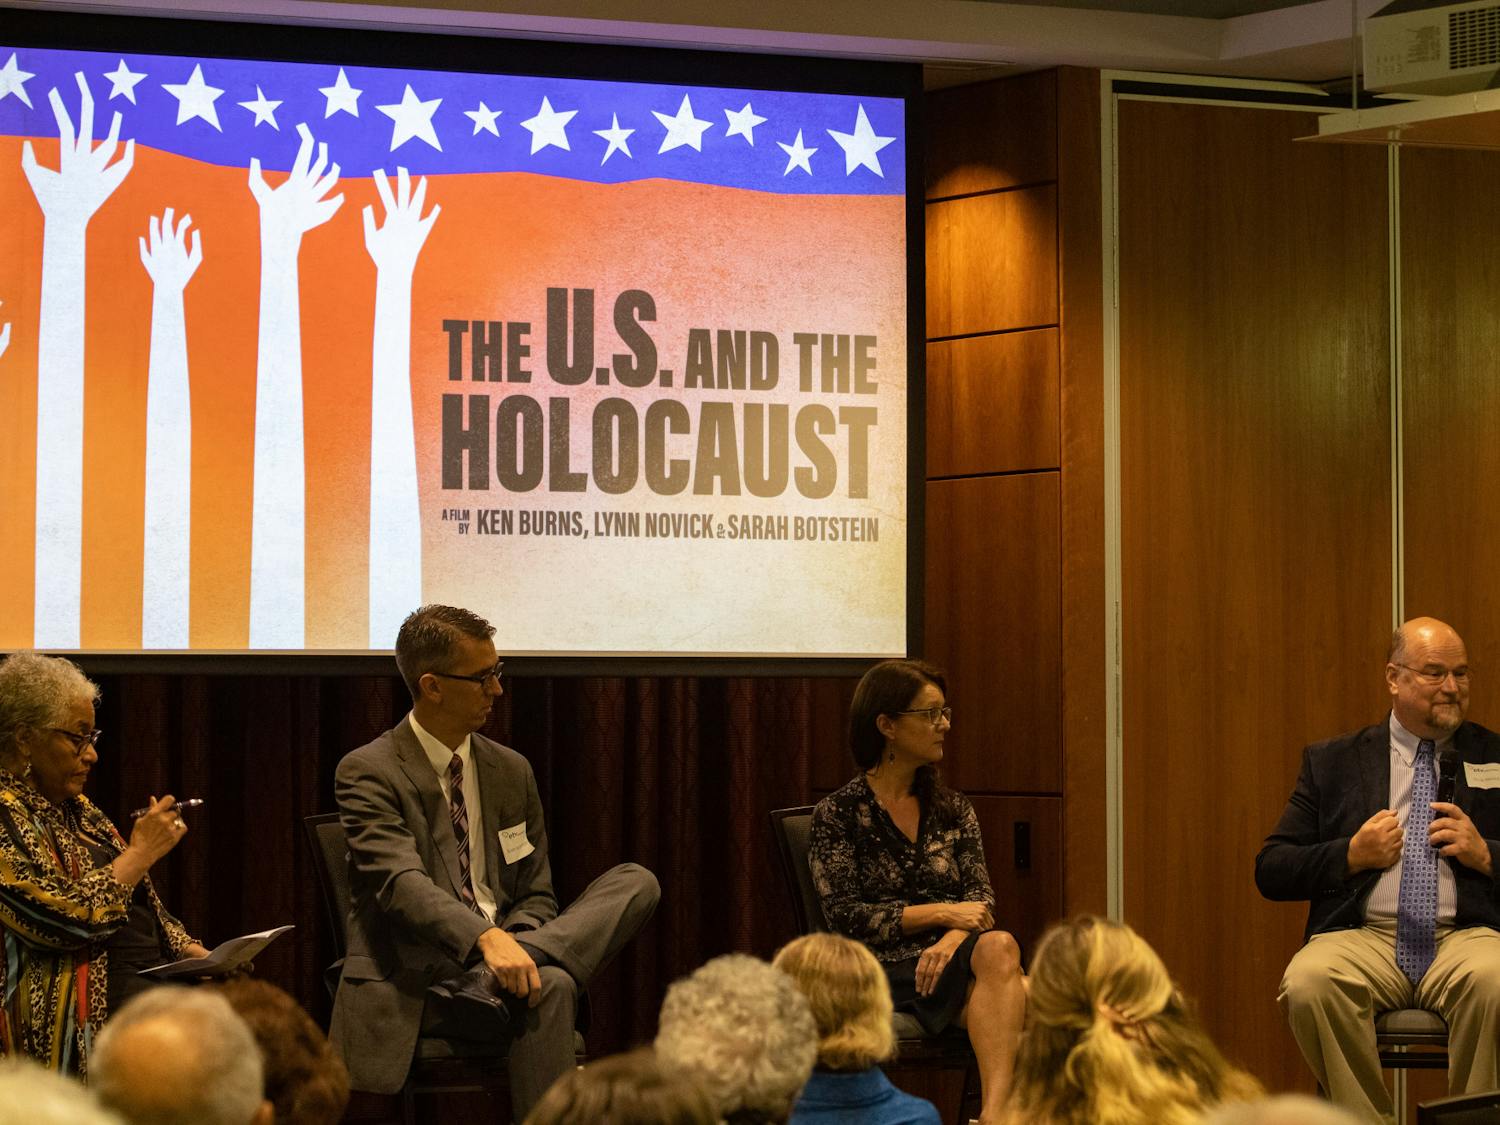 S.C. Council on the Holocaust board members Beryl Dakers, Scott Auspelmyer, Dr. Saskia Coenen Snyder and Dr. Doyle Stevick answer questions from the audience during The U.S. and The Holocaust panel on September 14, 2022. The series was directed by 16-time Emmy award-winning director, Ken Burns.&nbsp;